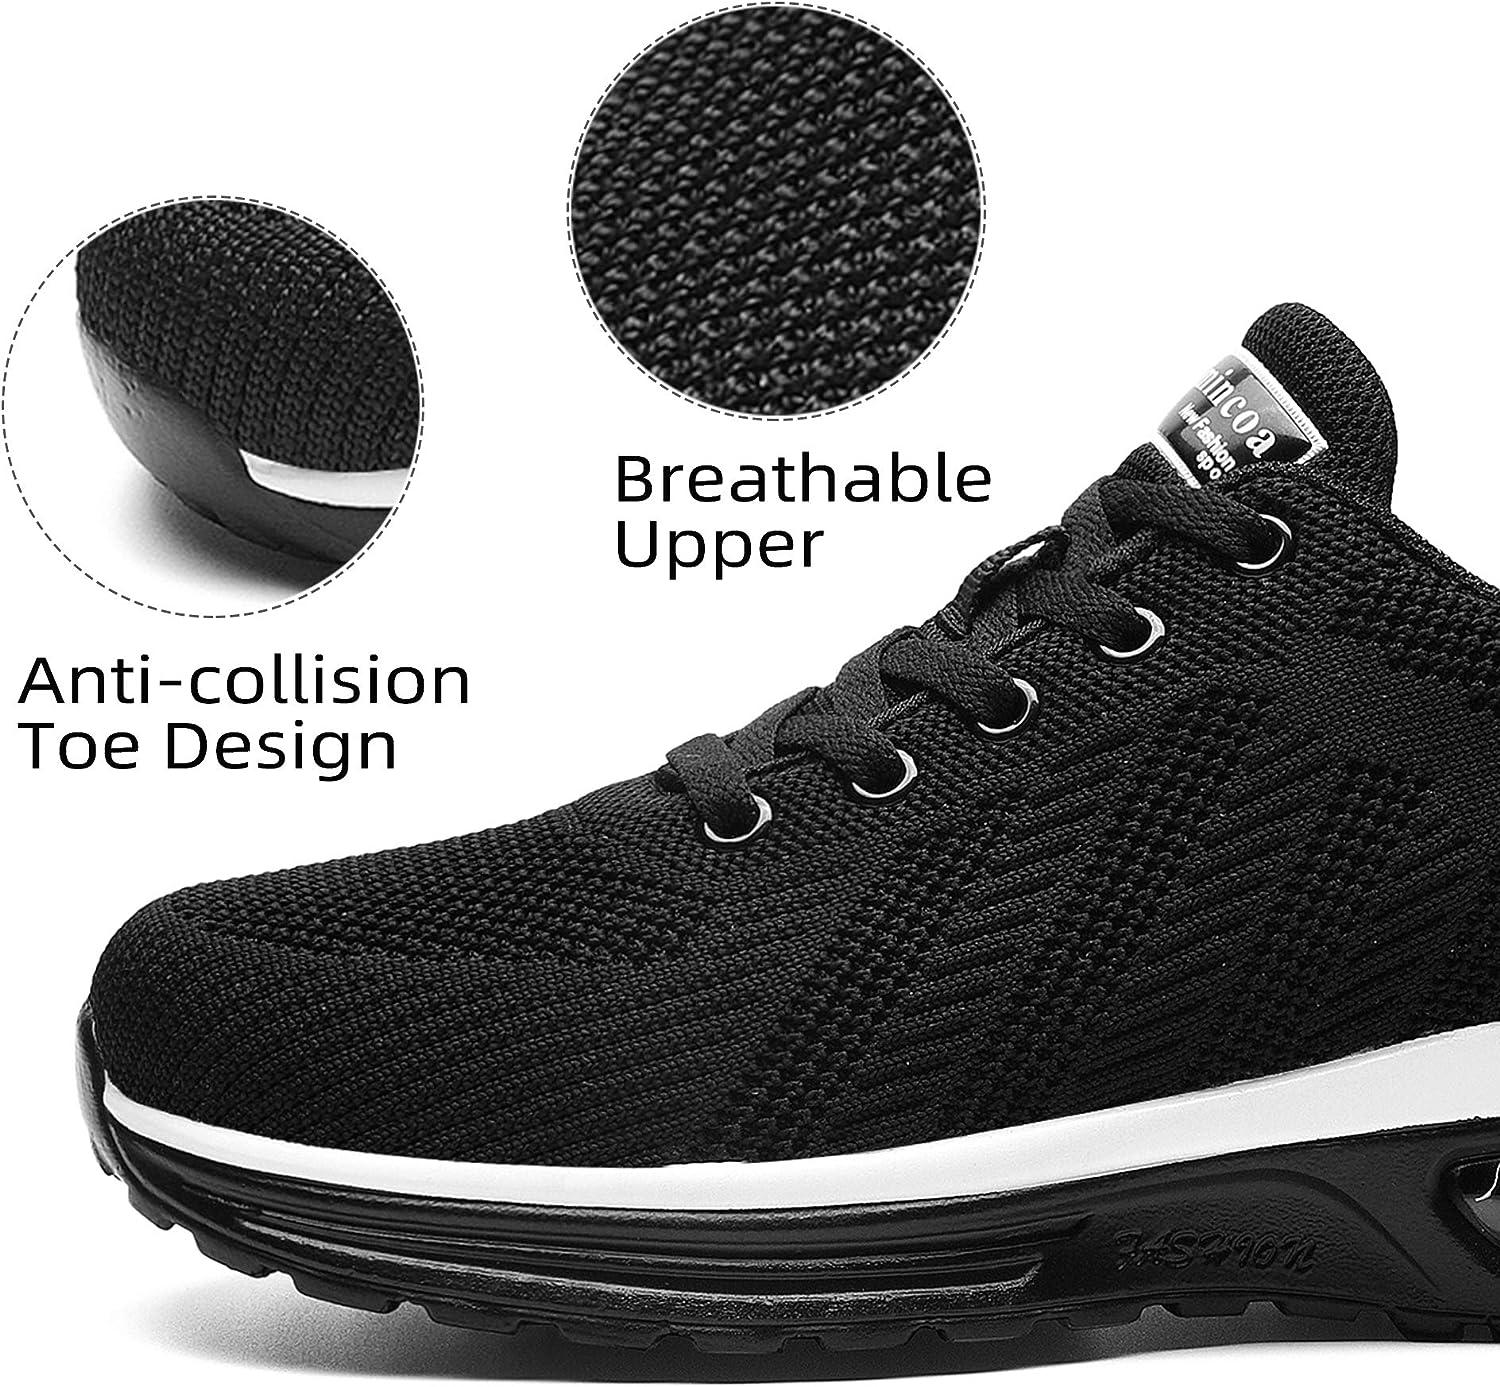  Lamincoa Men's Tennis Walking Shoes Slip On Lightweight  Athletic Fashion Casual Sneakers for Running Gym Jogging Fitness Black US 7